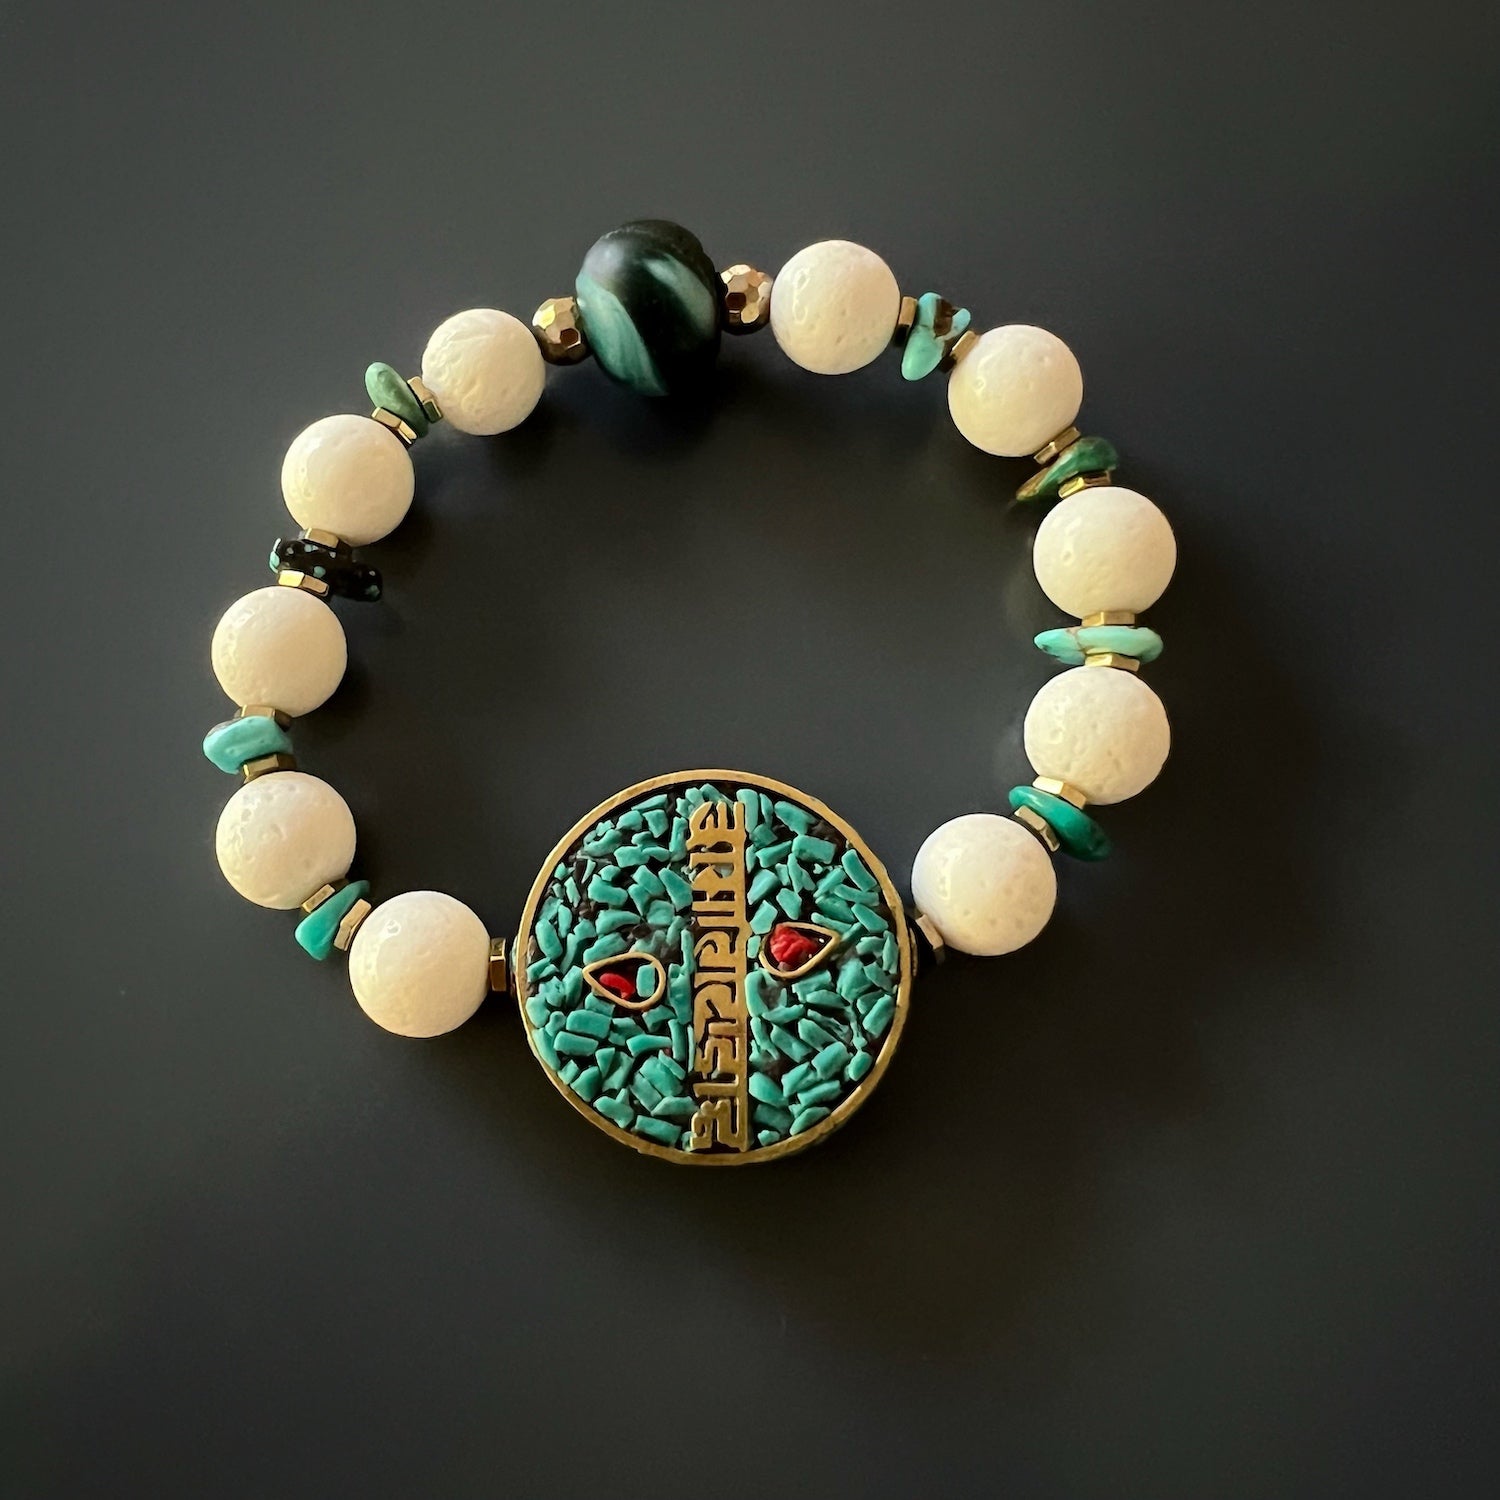 Experience the protection and good fortune of the OM Mani Mantra Bracelet, featuring turquoise and a sacred mantra bead.